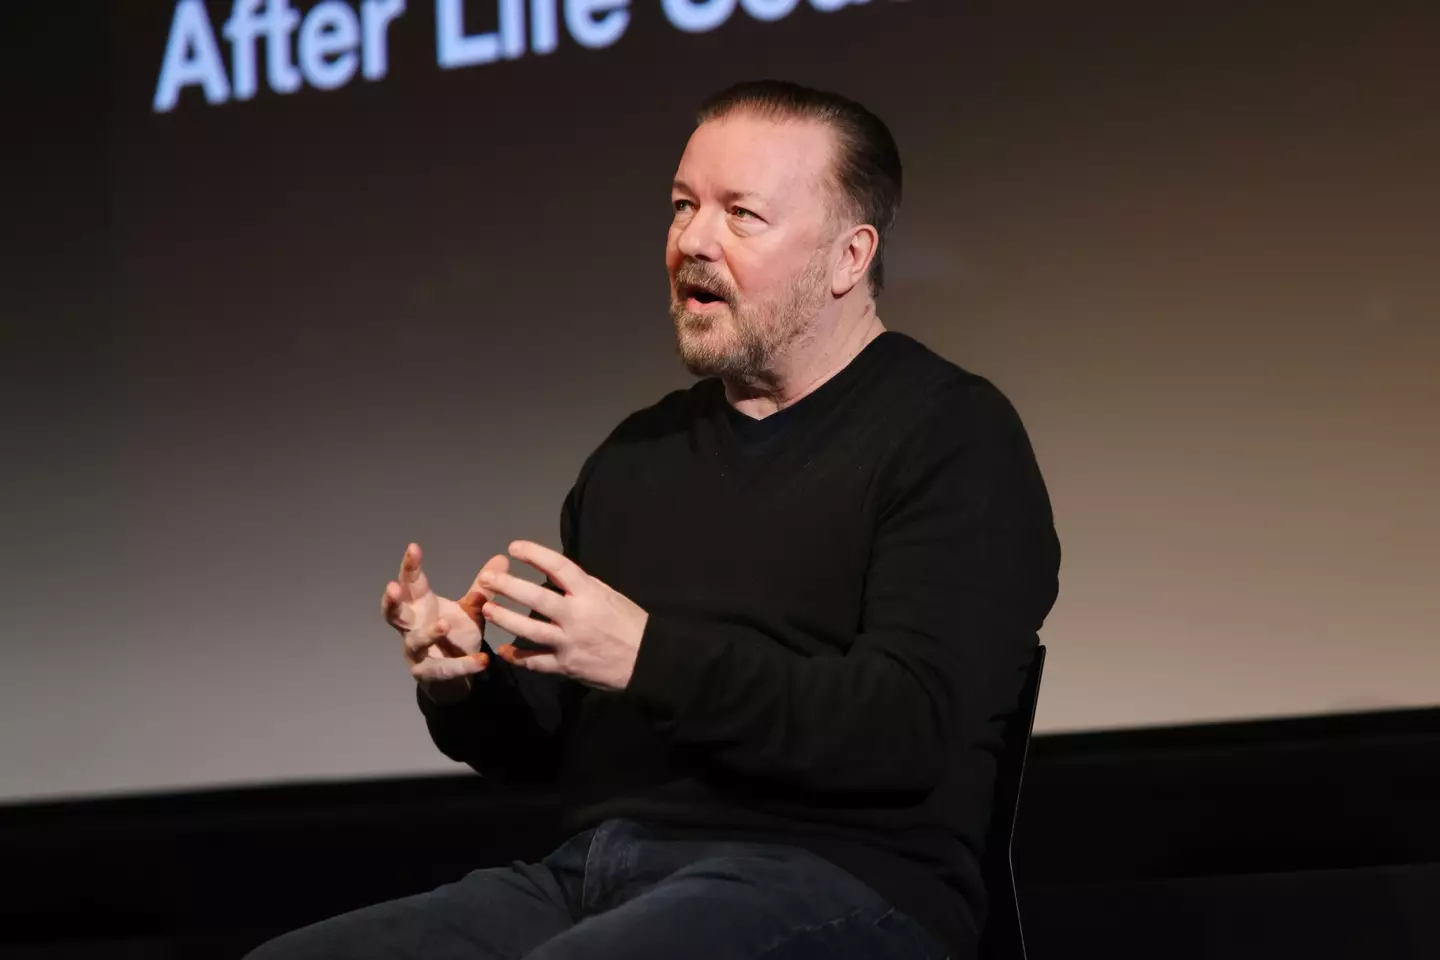 Ricky Gervais has faced some backlash after his latest comedy special was released on Netflix.